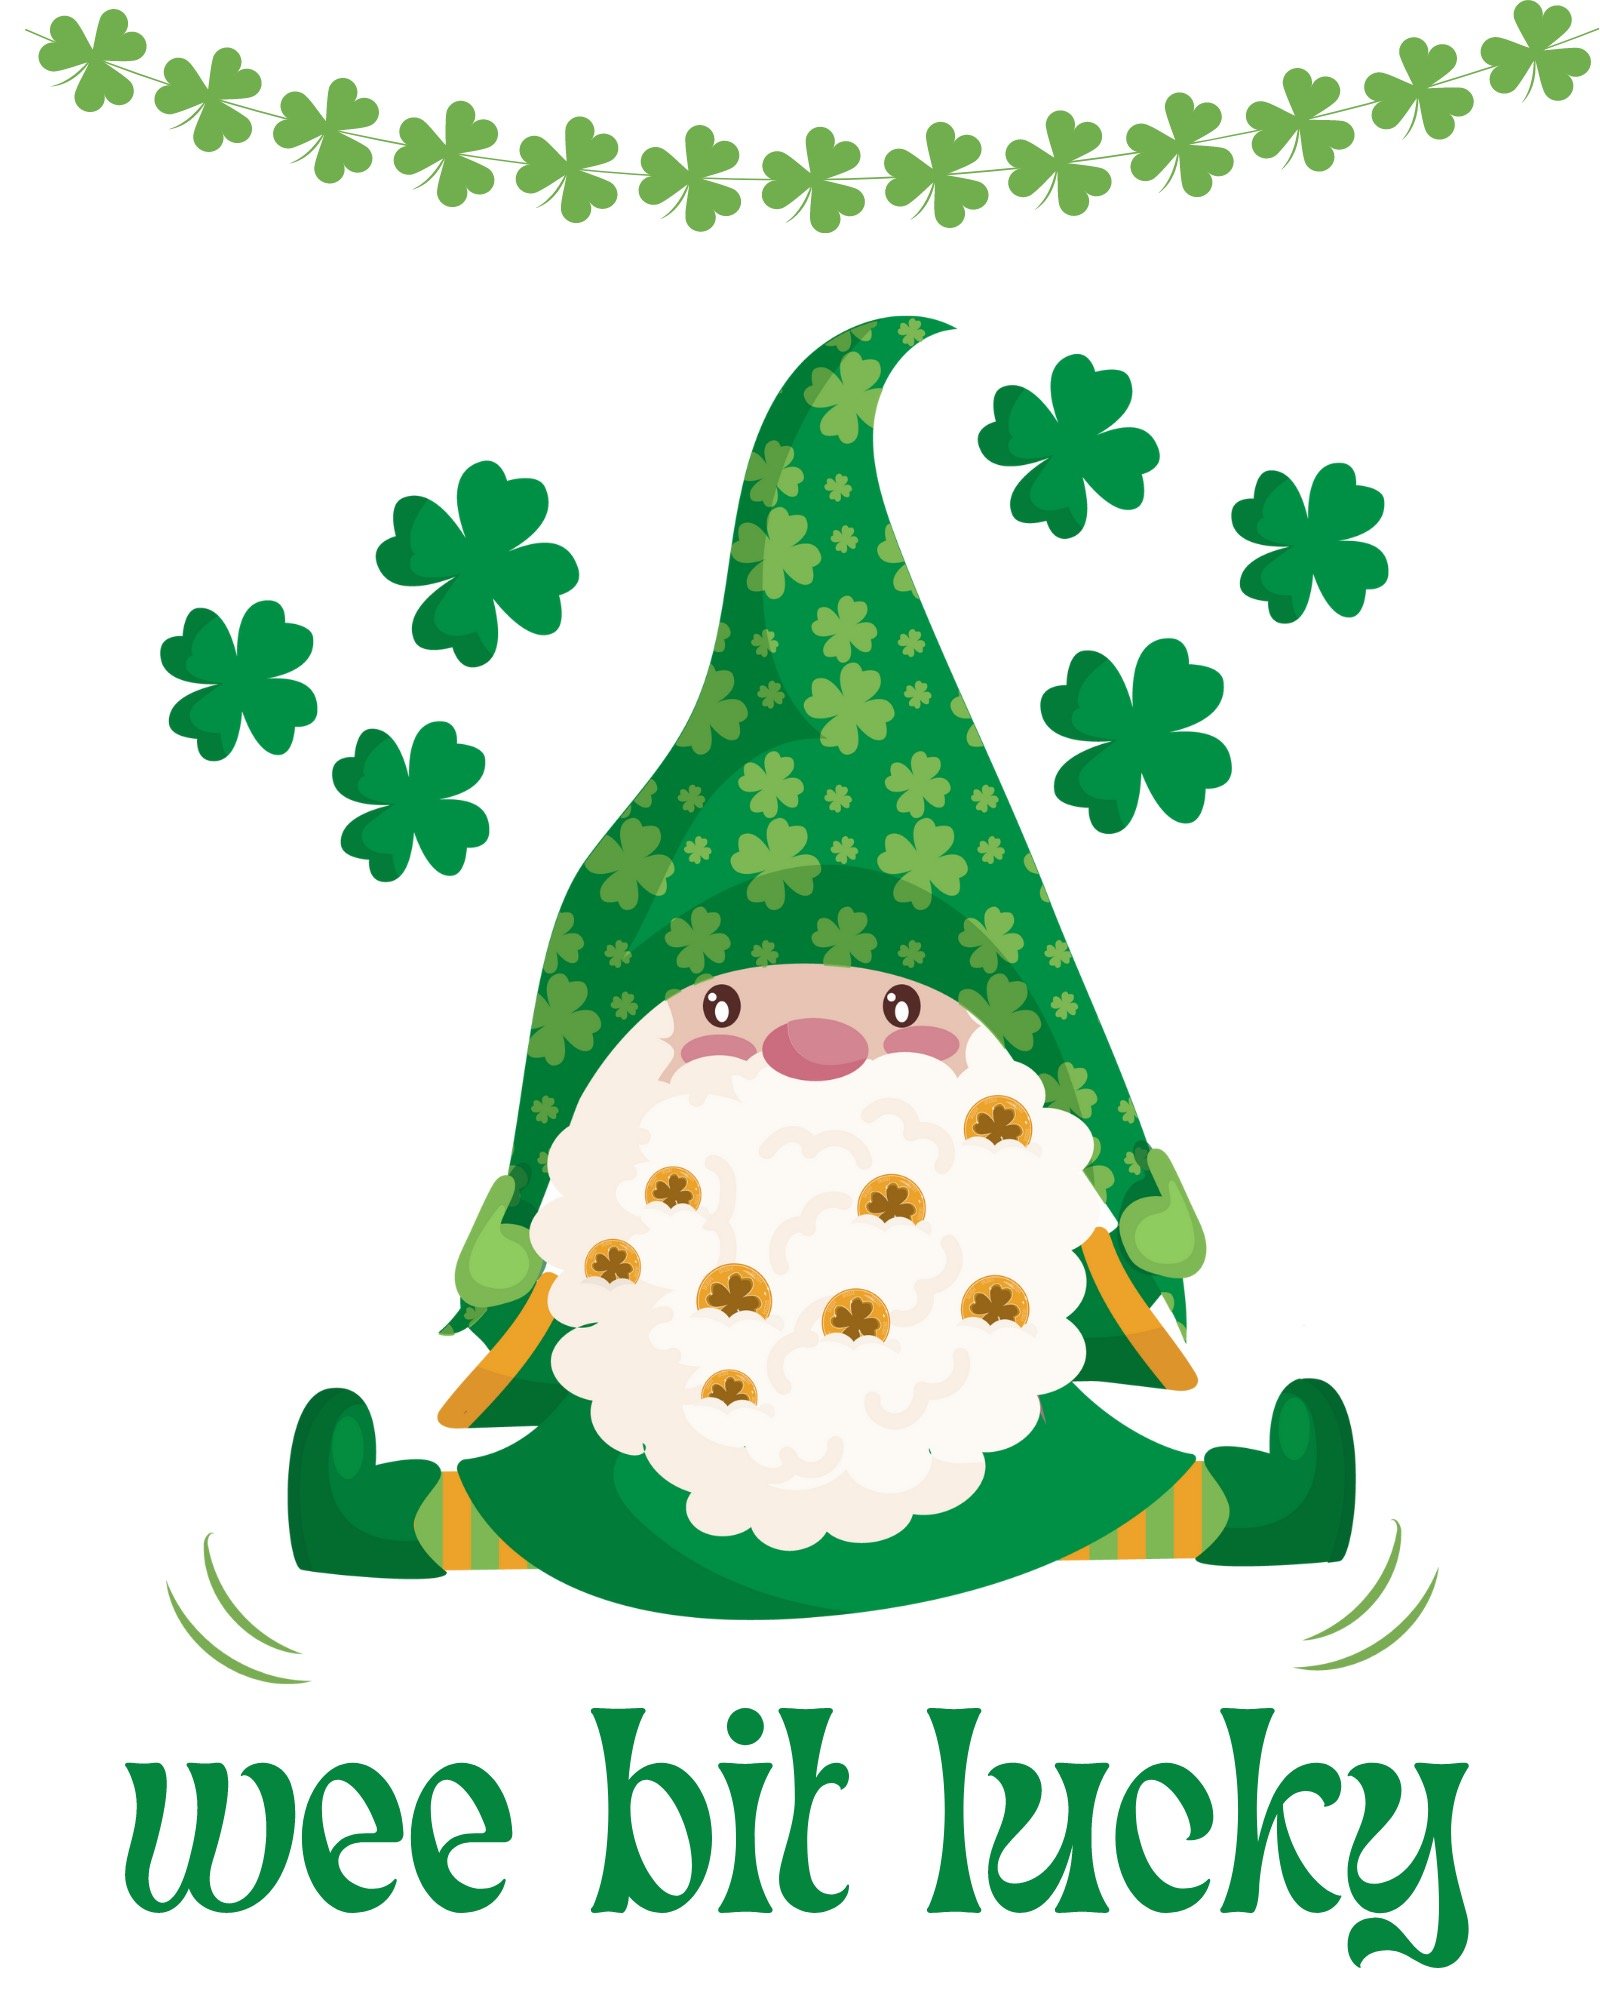 gnome and shamrocks with phrase "wee bit lucky"